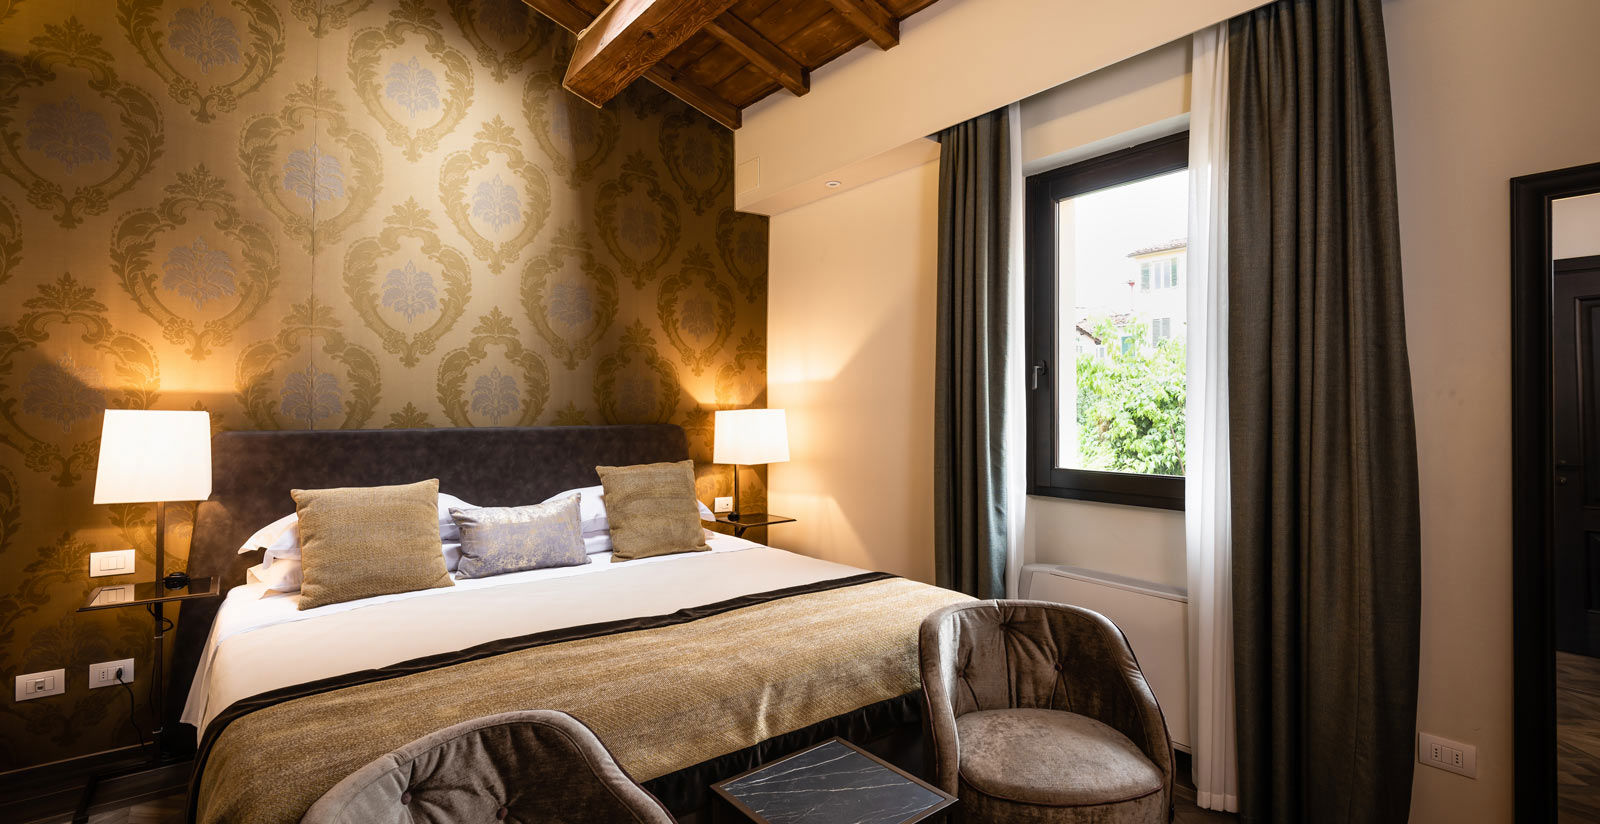 Corte Guelfa - Rooms for young travellers in Florence 4